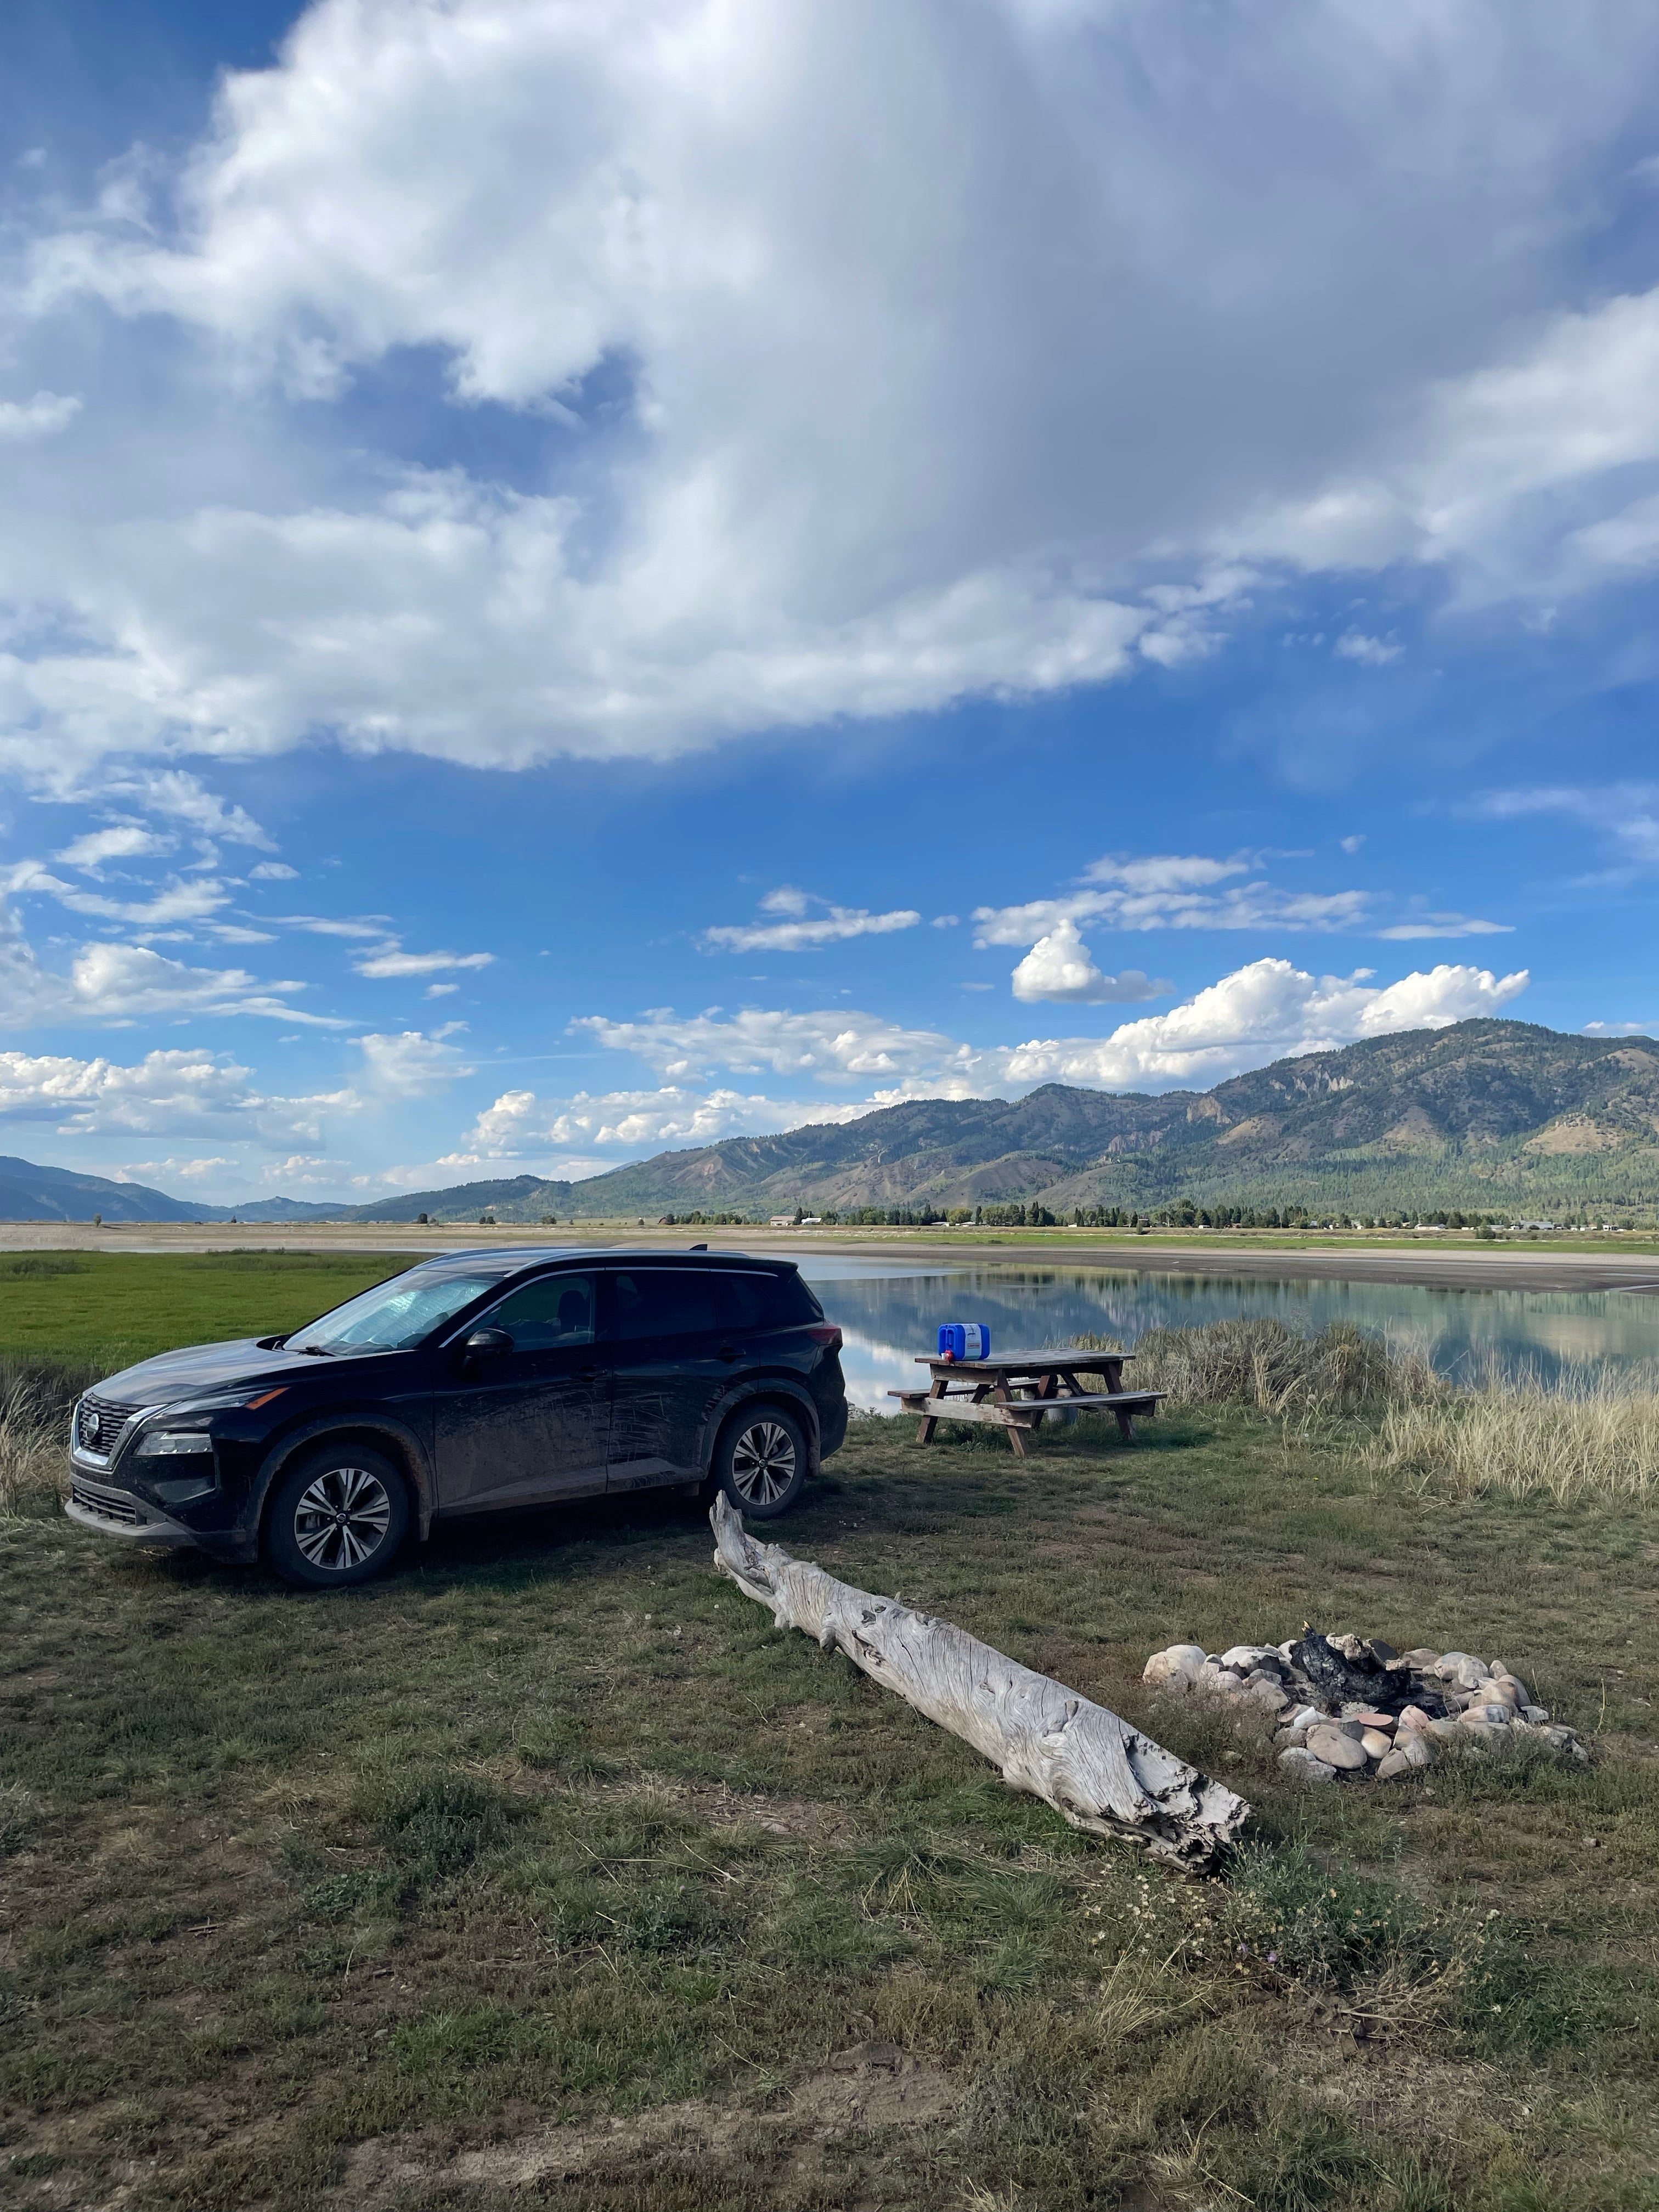 Camper submitted image from Reservoir Disperse Camping near Melvin Brewing - 3